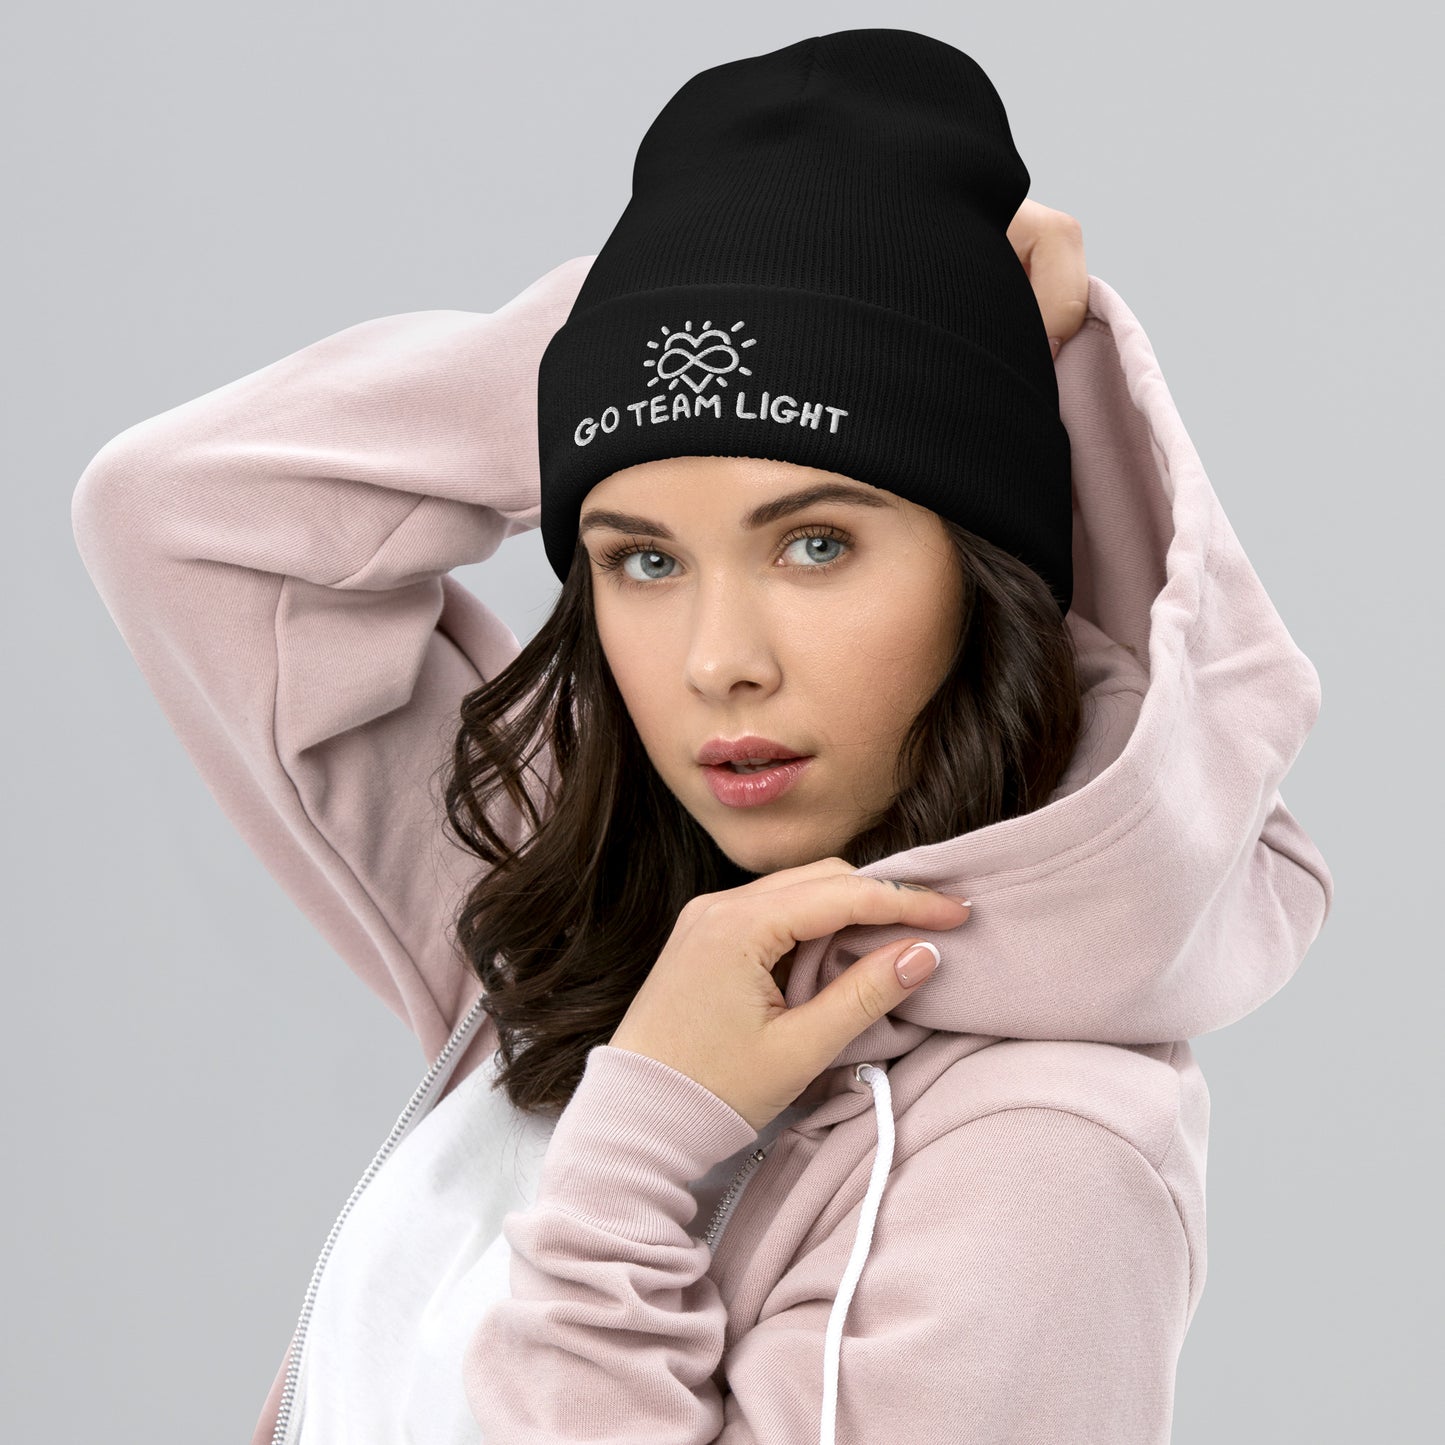 GO TEAM LIGHT, cuffed embroidered beanie in black